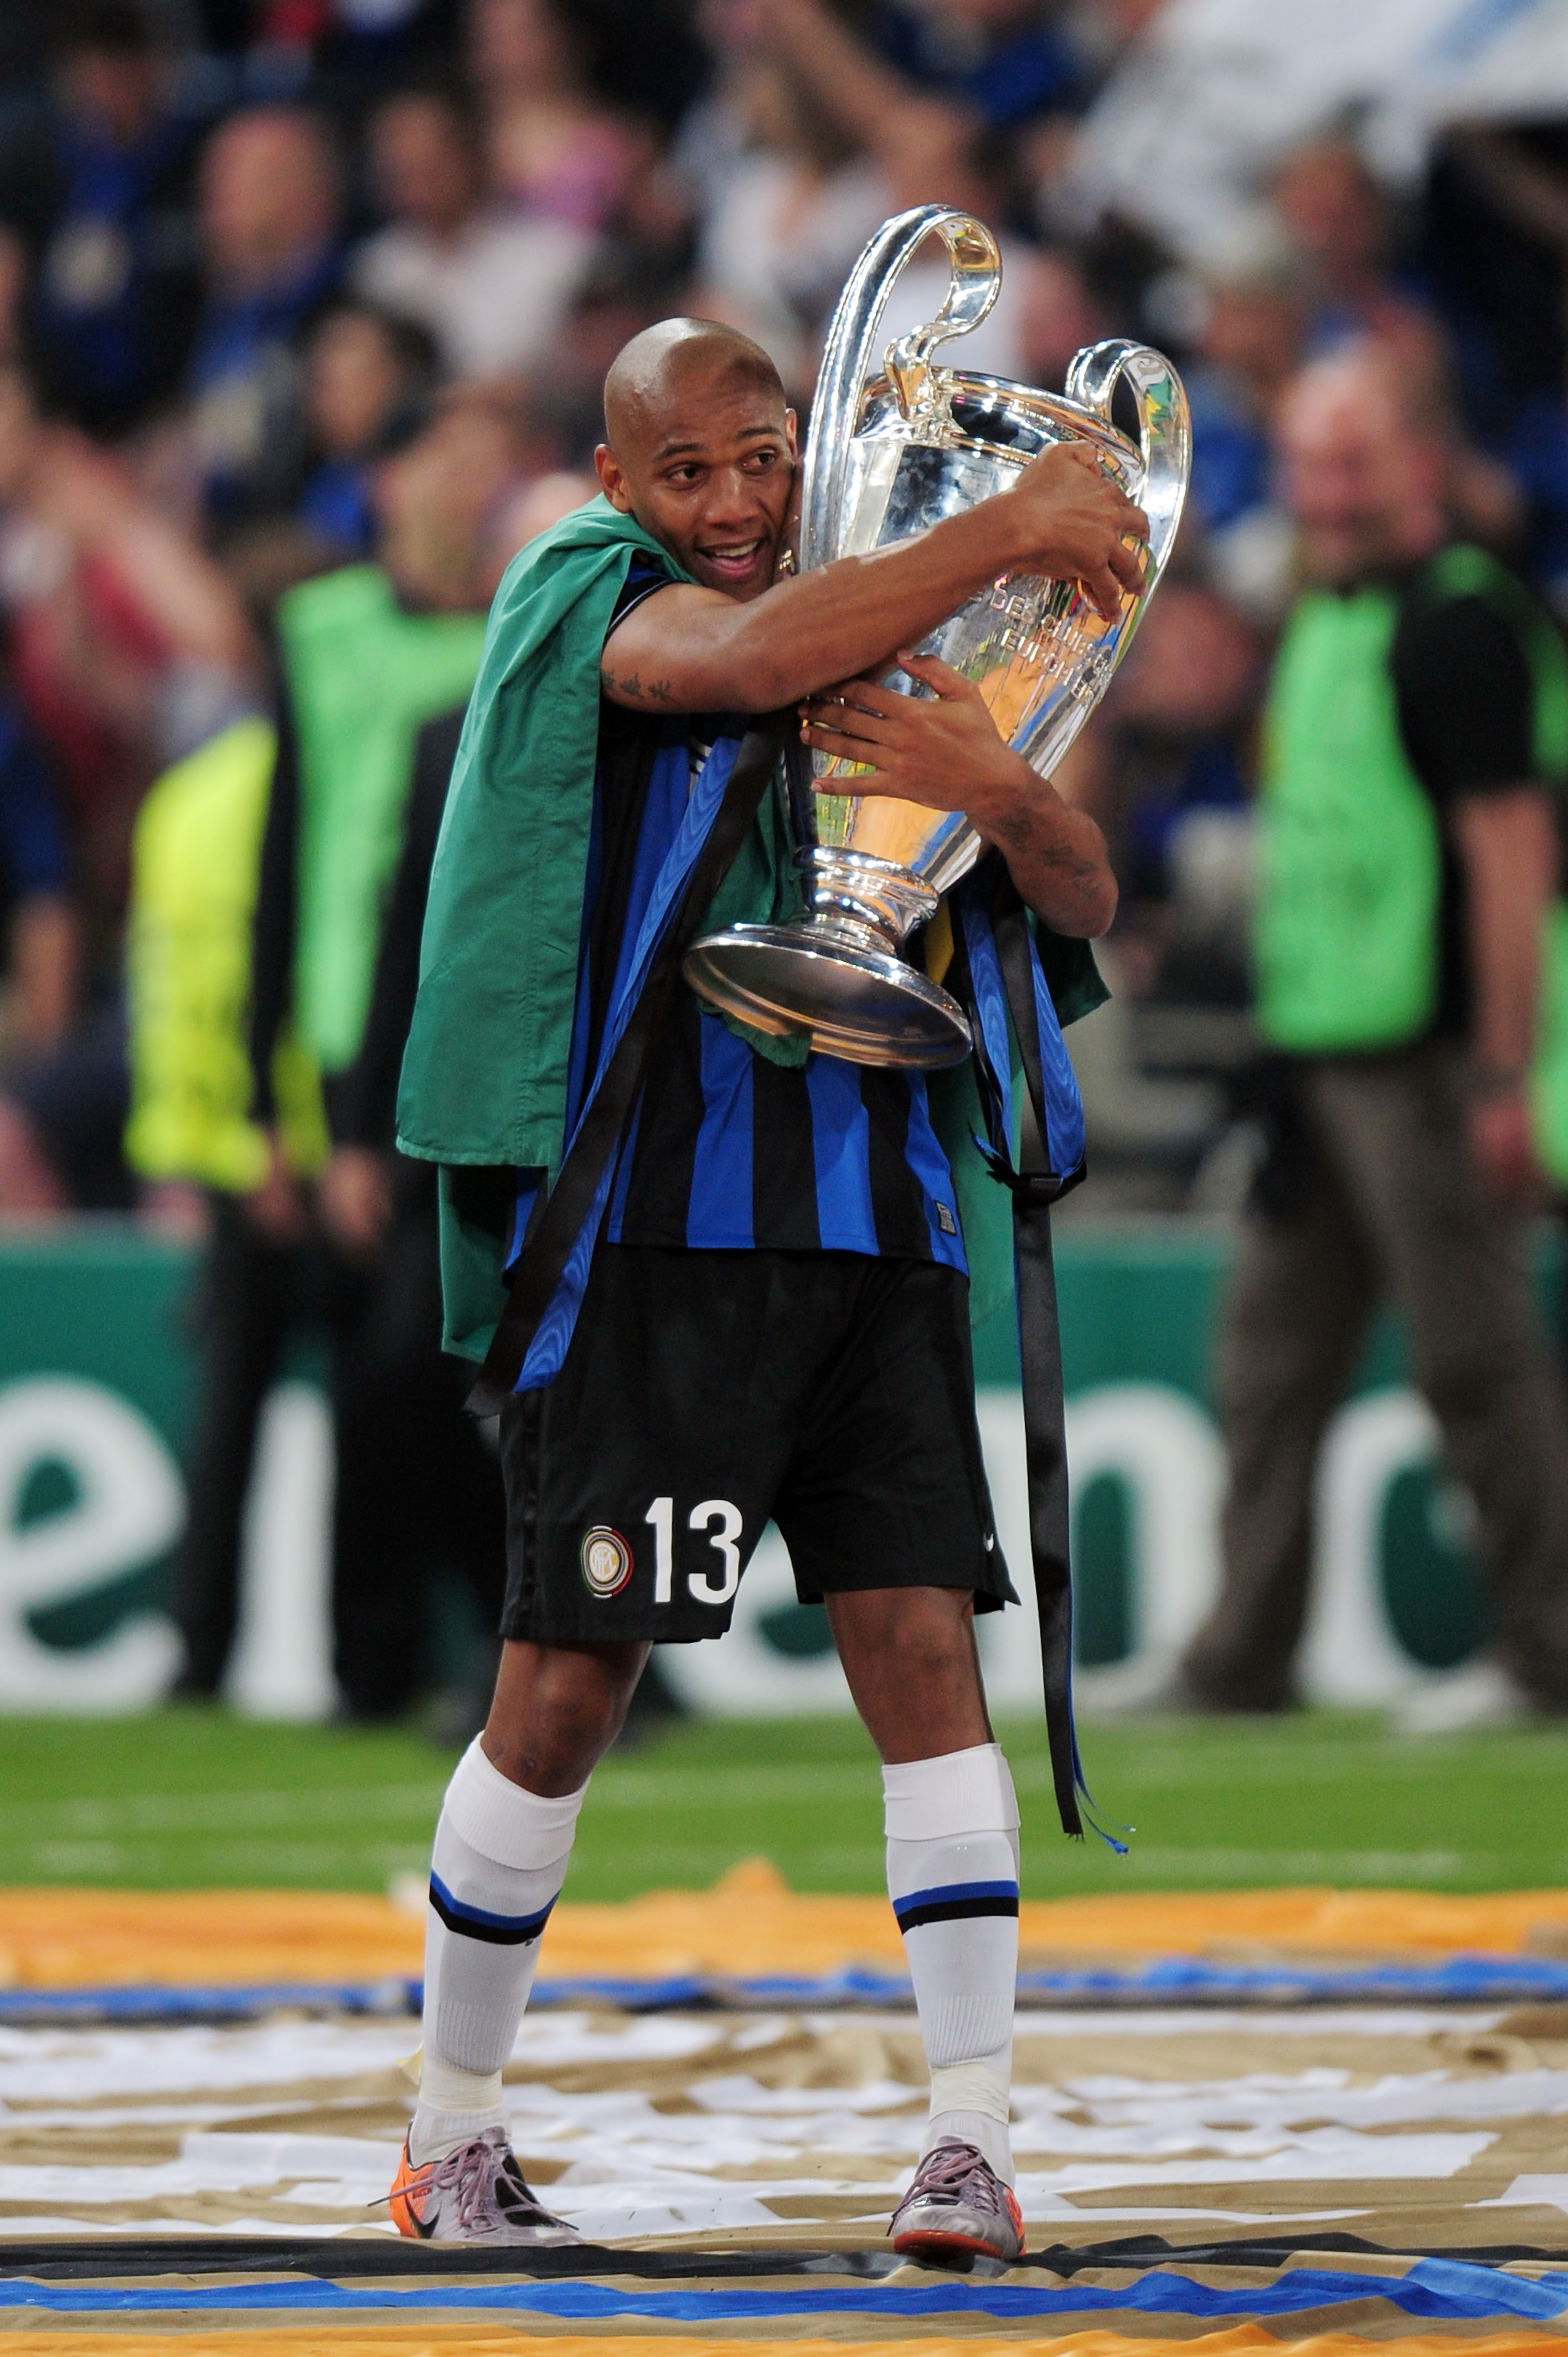 MADRID, SPAIN - MAY 22:  Maicon of Inter Milan celebrates with the UEFA Champions League trophy following his team's victory at the end of the UEFA Champions League Final match between FC Bayern Muenchen and Inter Milan at the Estadio Santiago Bernabeu on